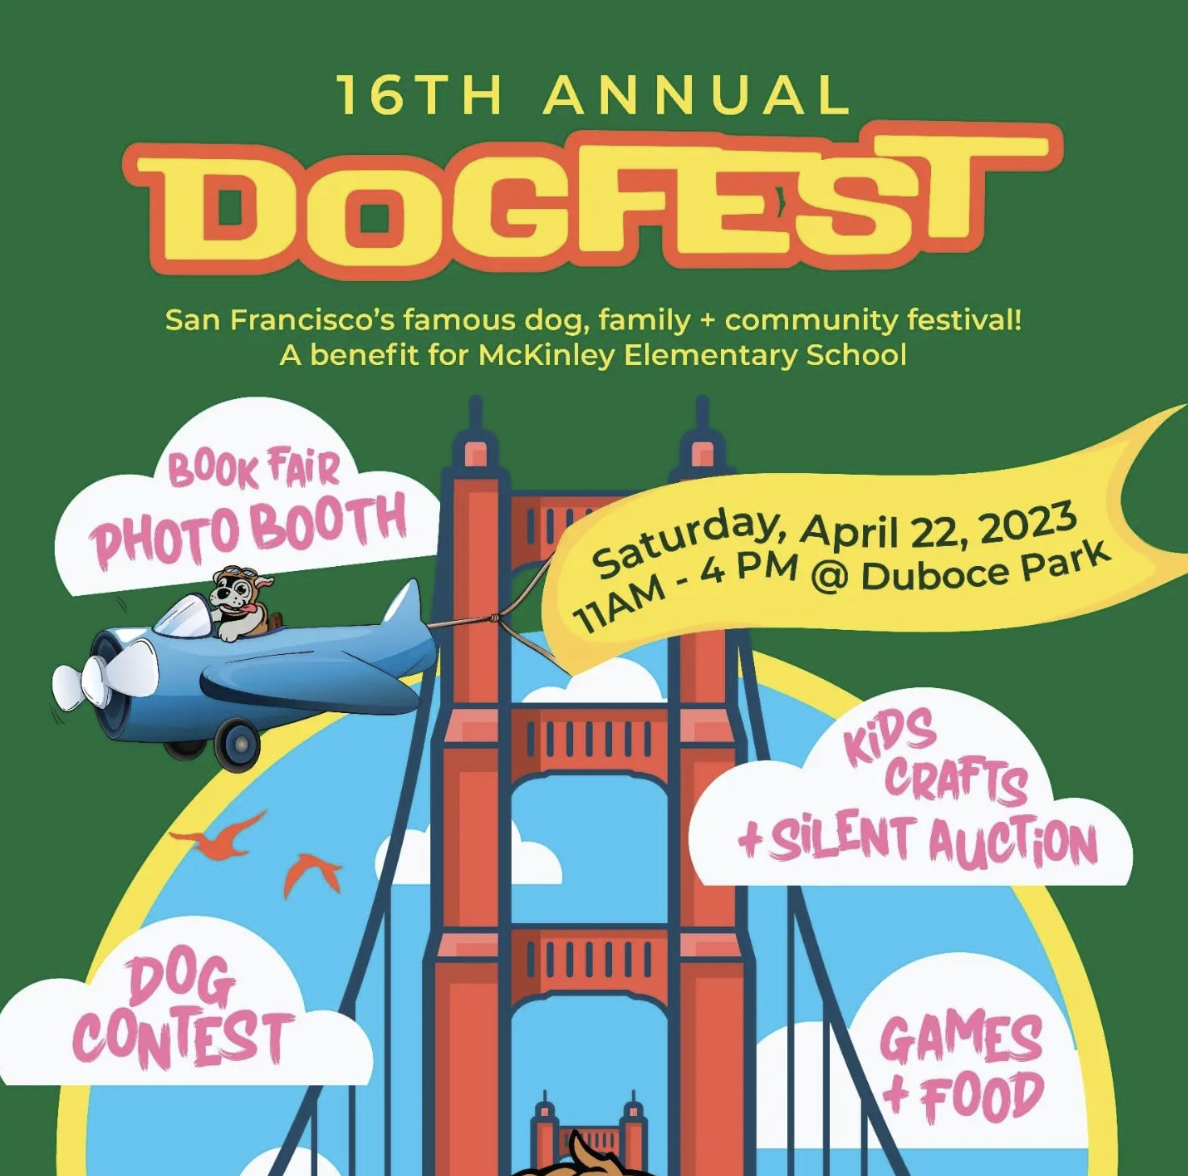 Dogfest 2023 at Duboce Park in San Francisco April 22, 2023 SF Station